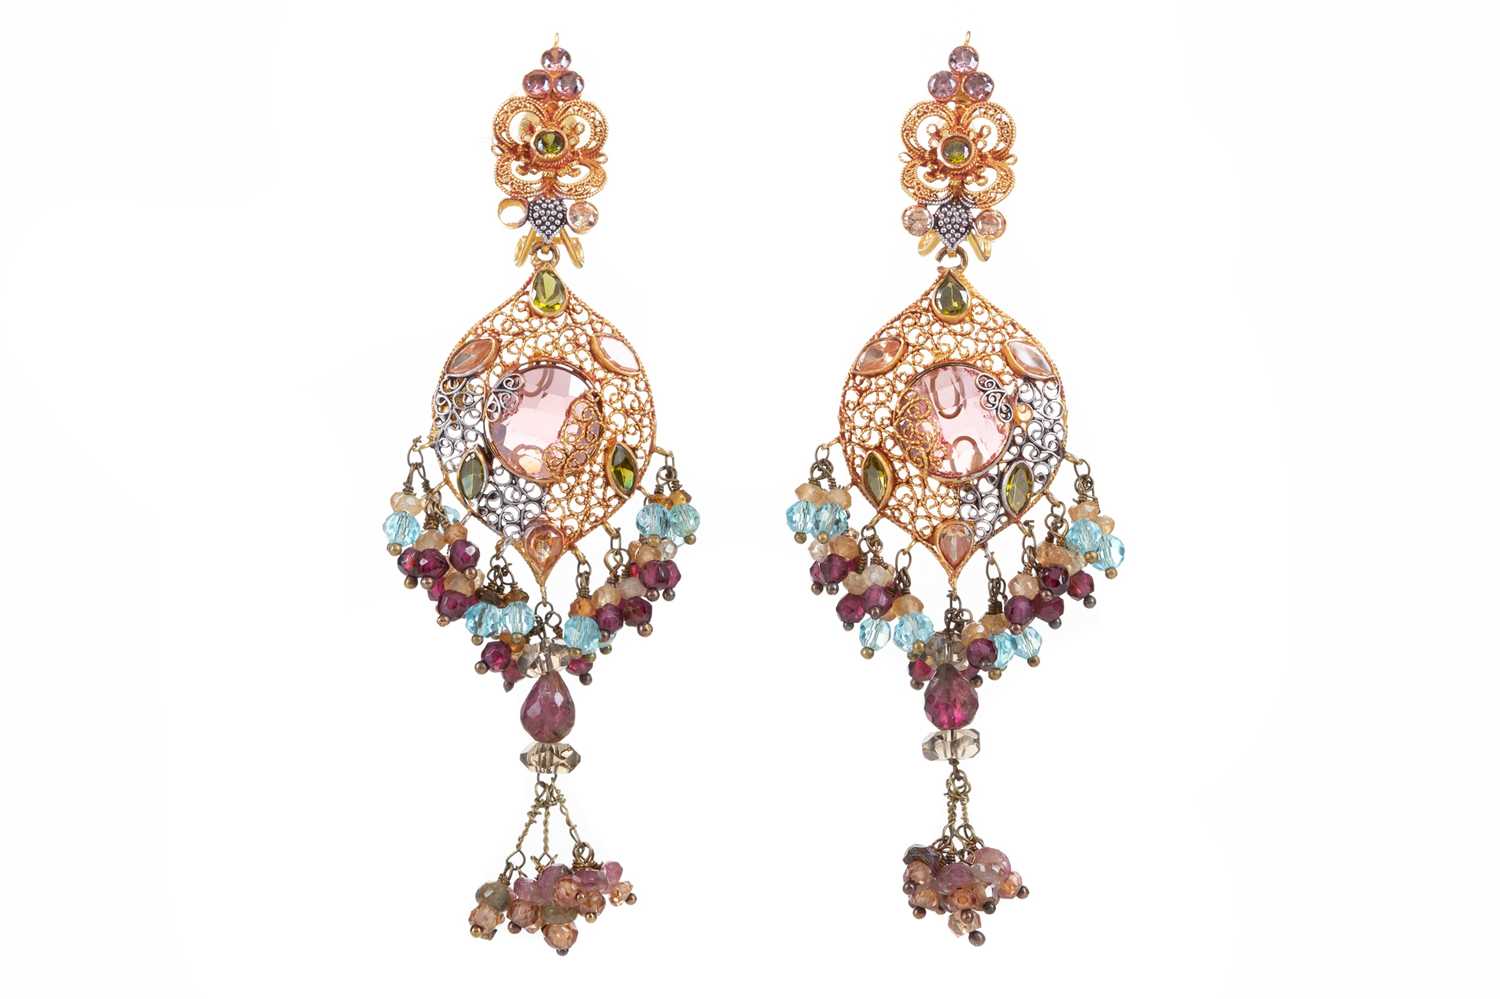 Lot 422 - AN IMPRESSIVE PAIR OF INDIAN GEMSTONE AND GOLD EARRINGS